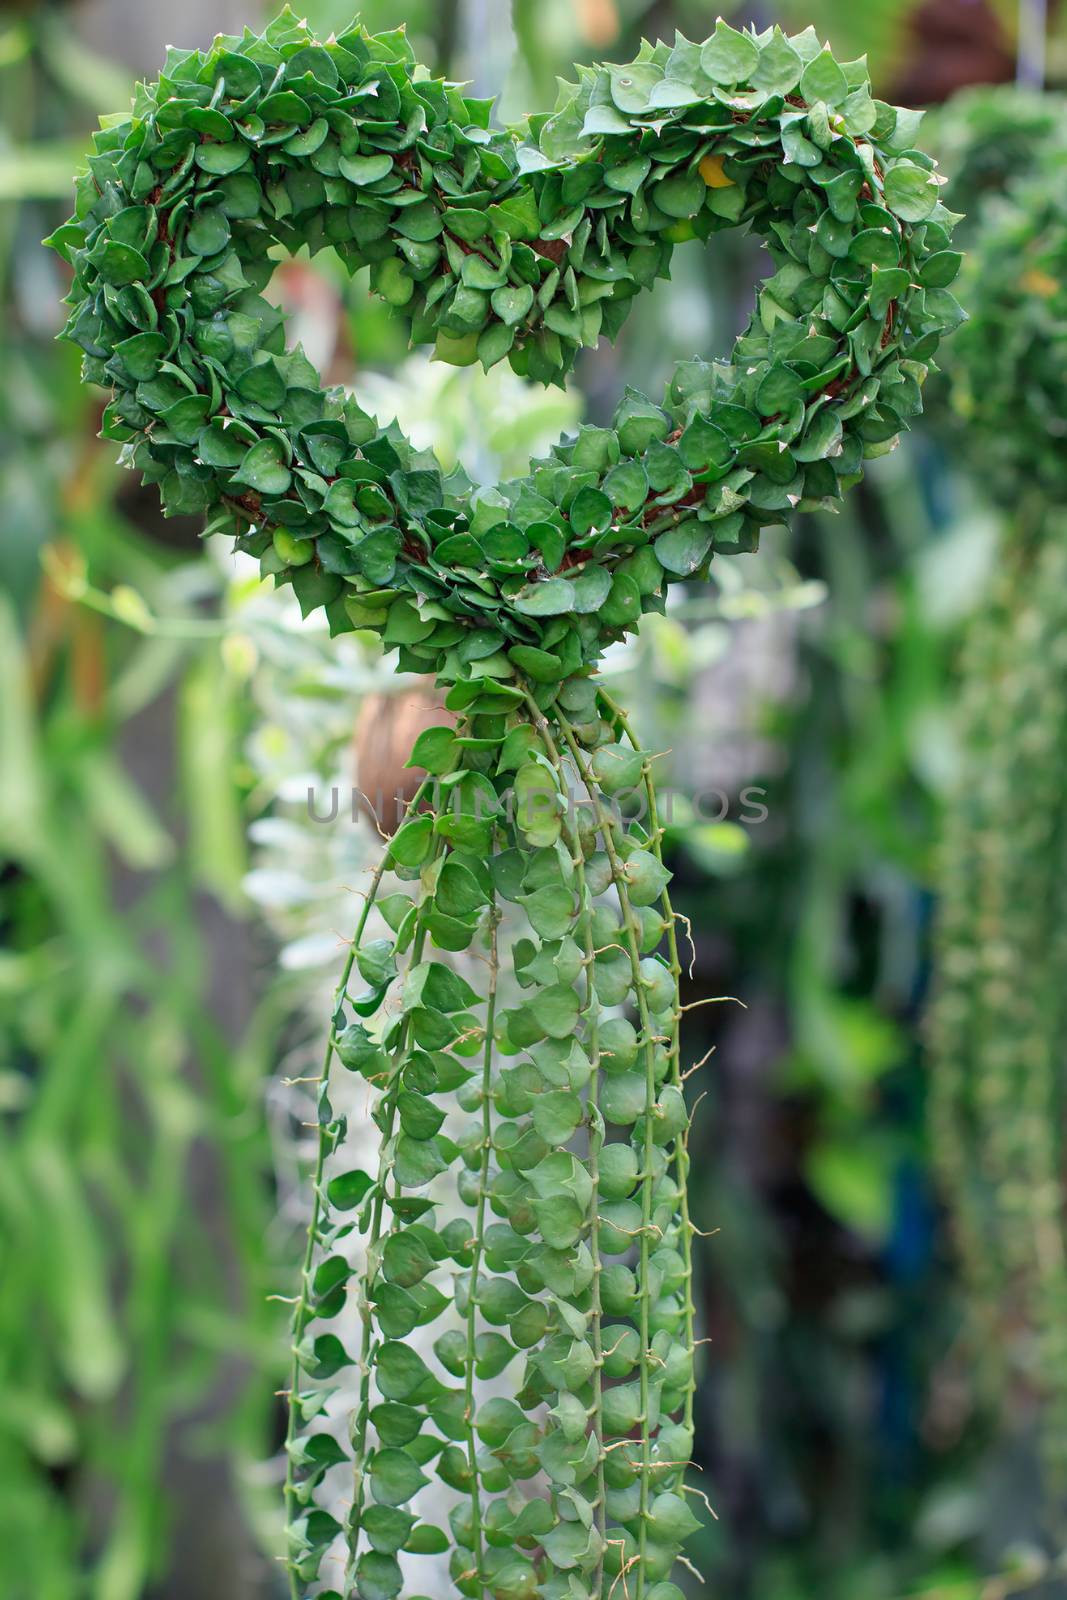 Dischidiasp , Hearts shape plant forming decorated in green hous by khunaspix